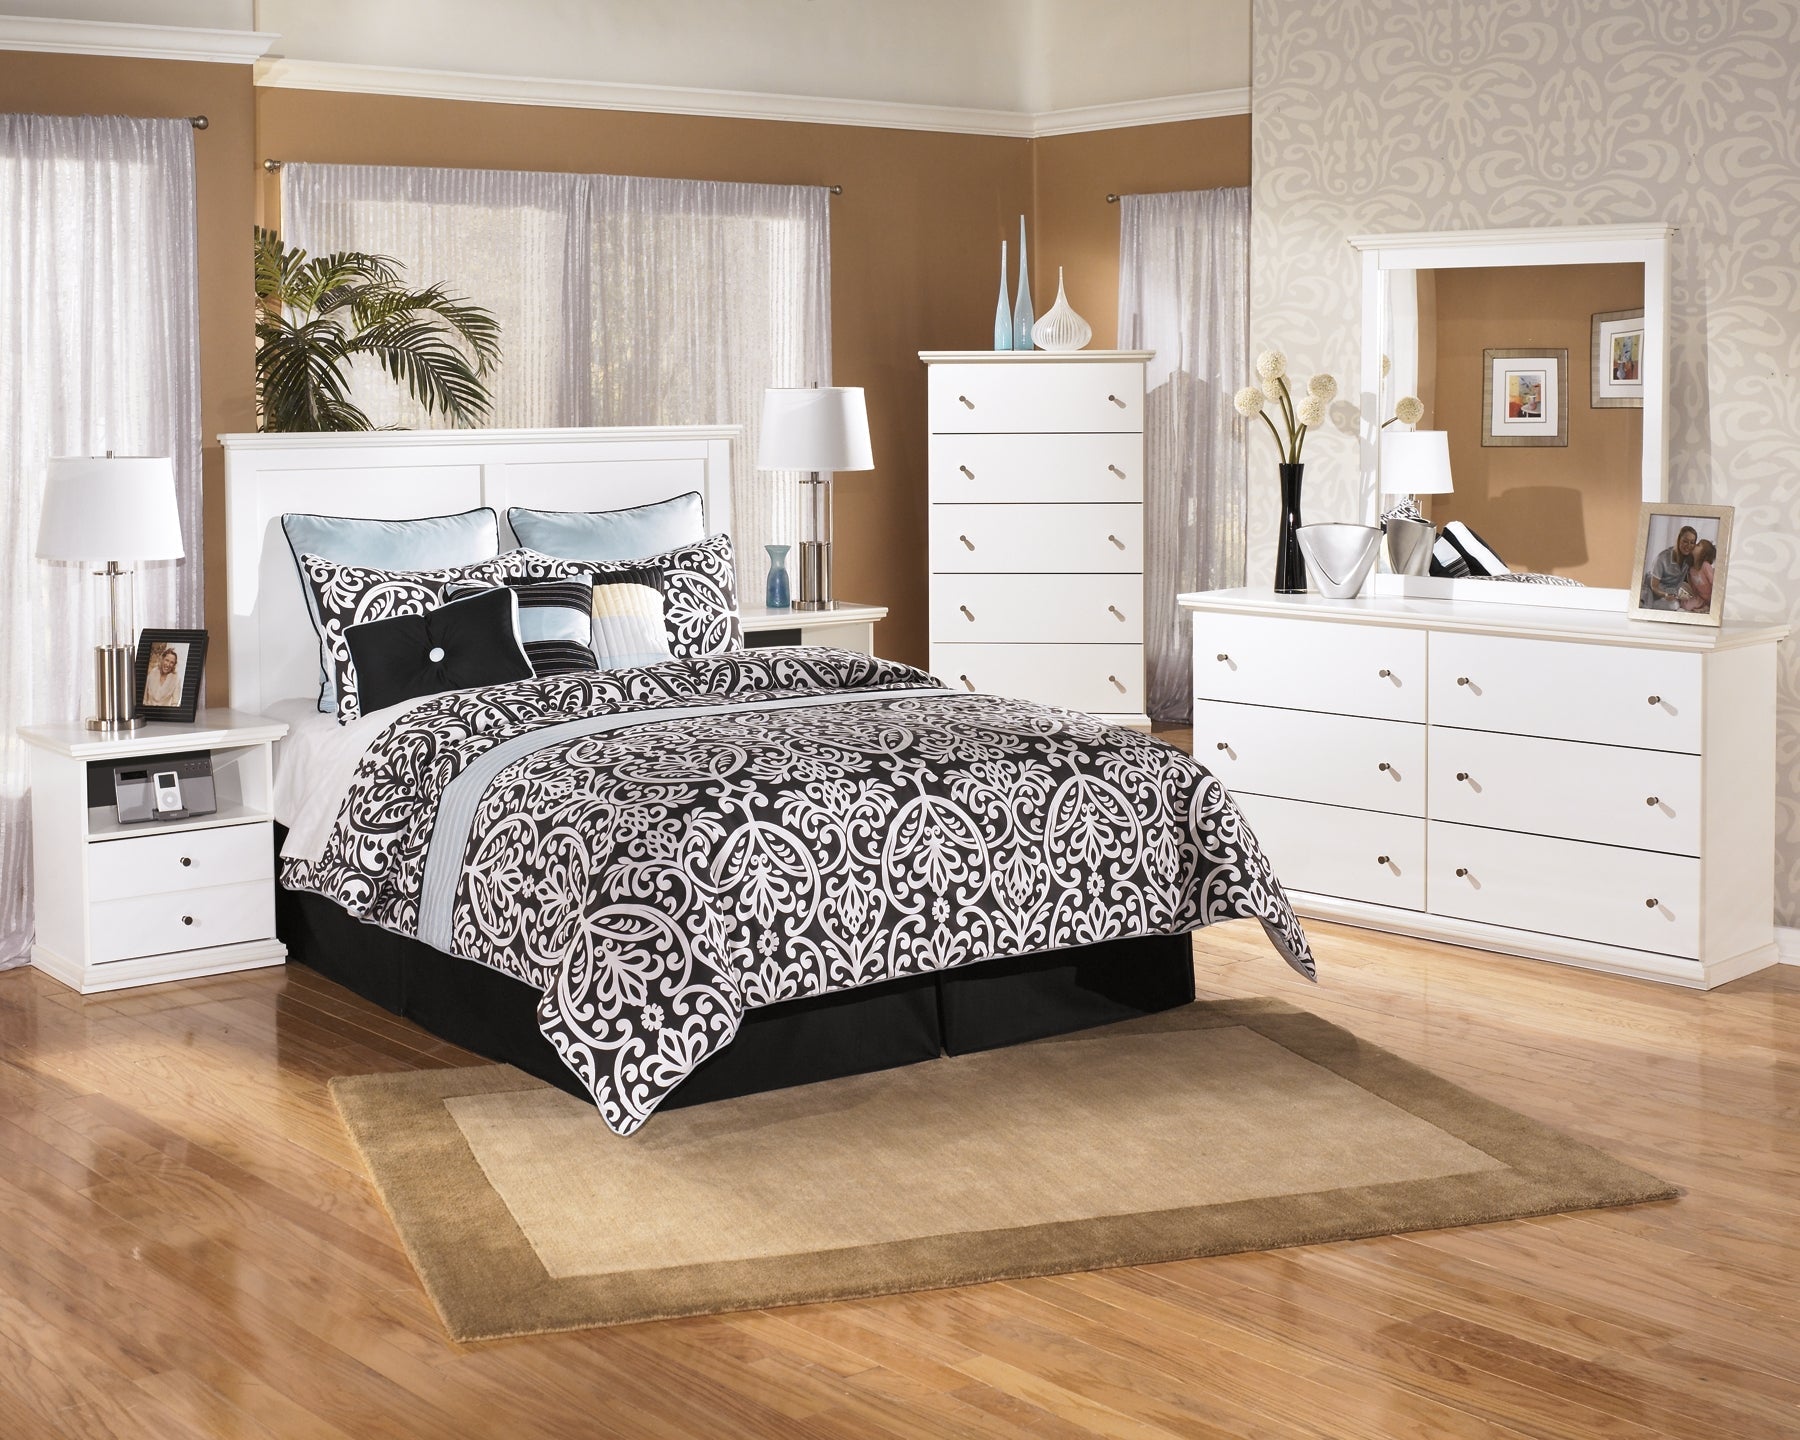 Bostwick Shoals Five Drawer Chest at Walker Mattress and Furniture Locations in Cedar Park and Belton TX.